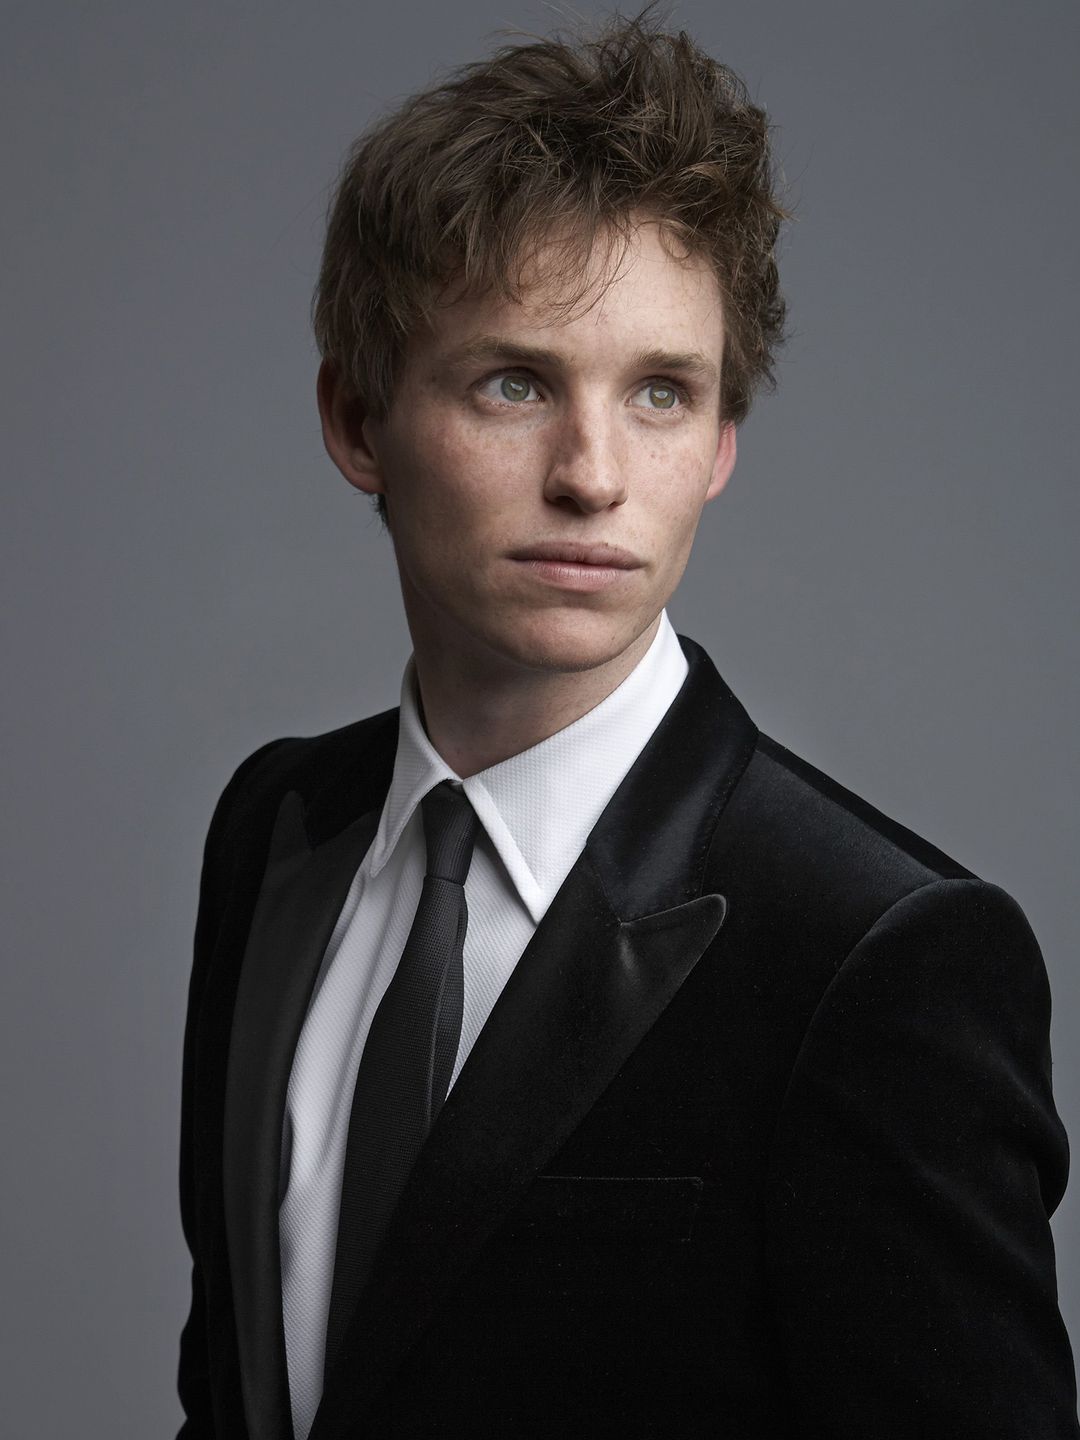 Eddie Redmayne who is his father